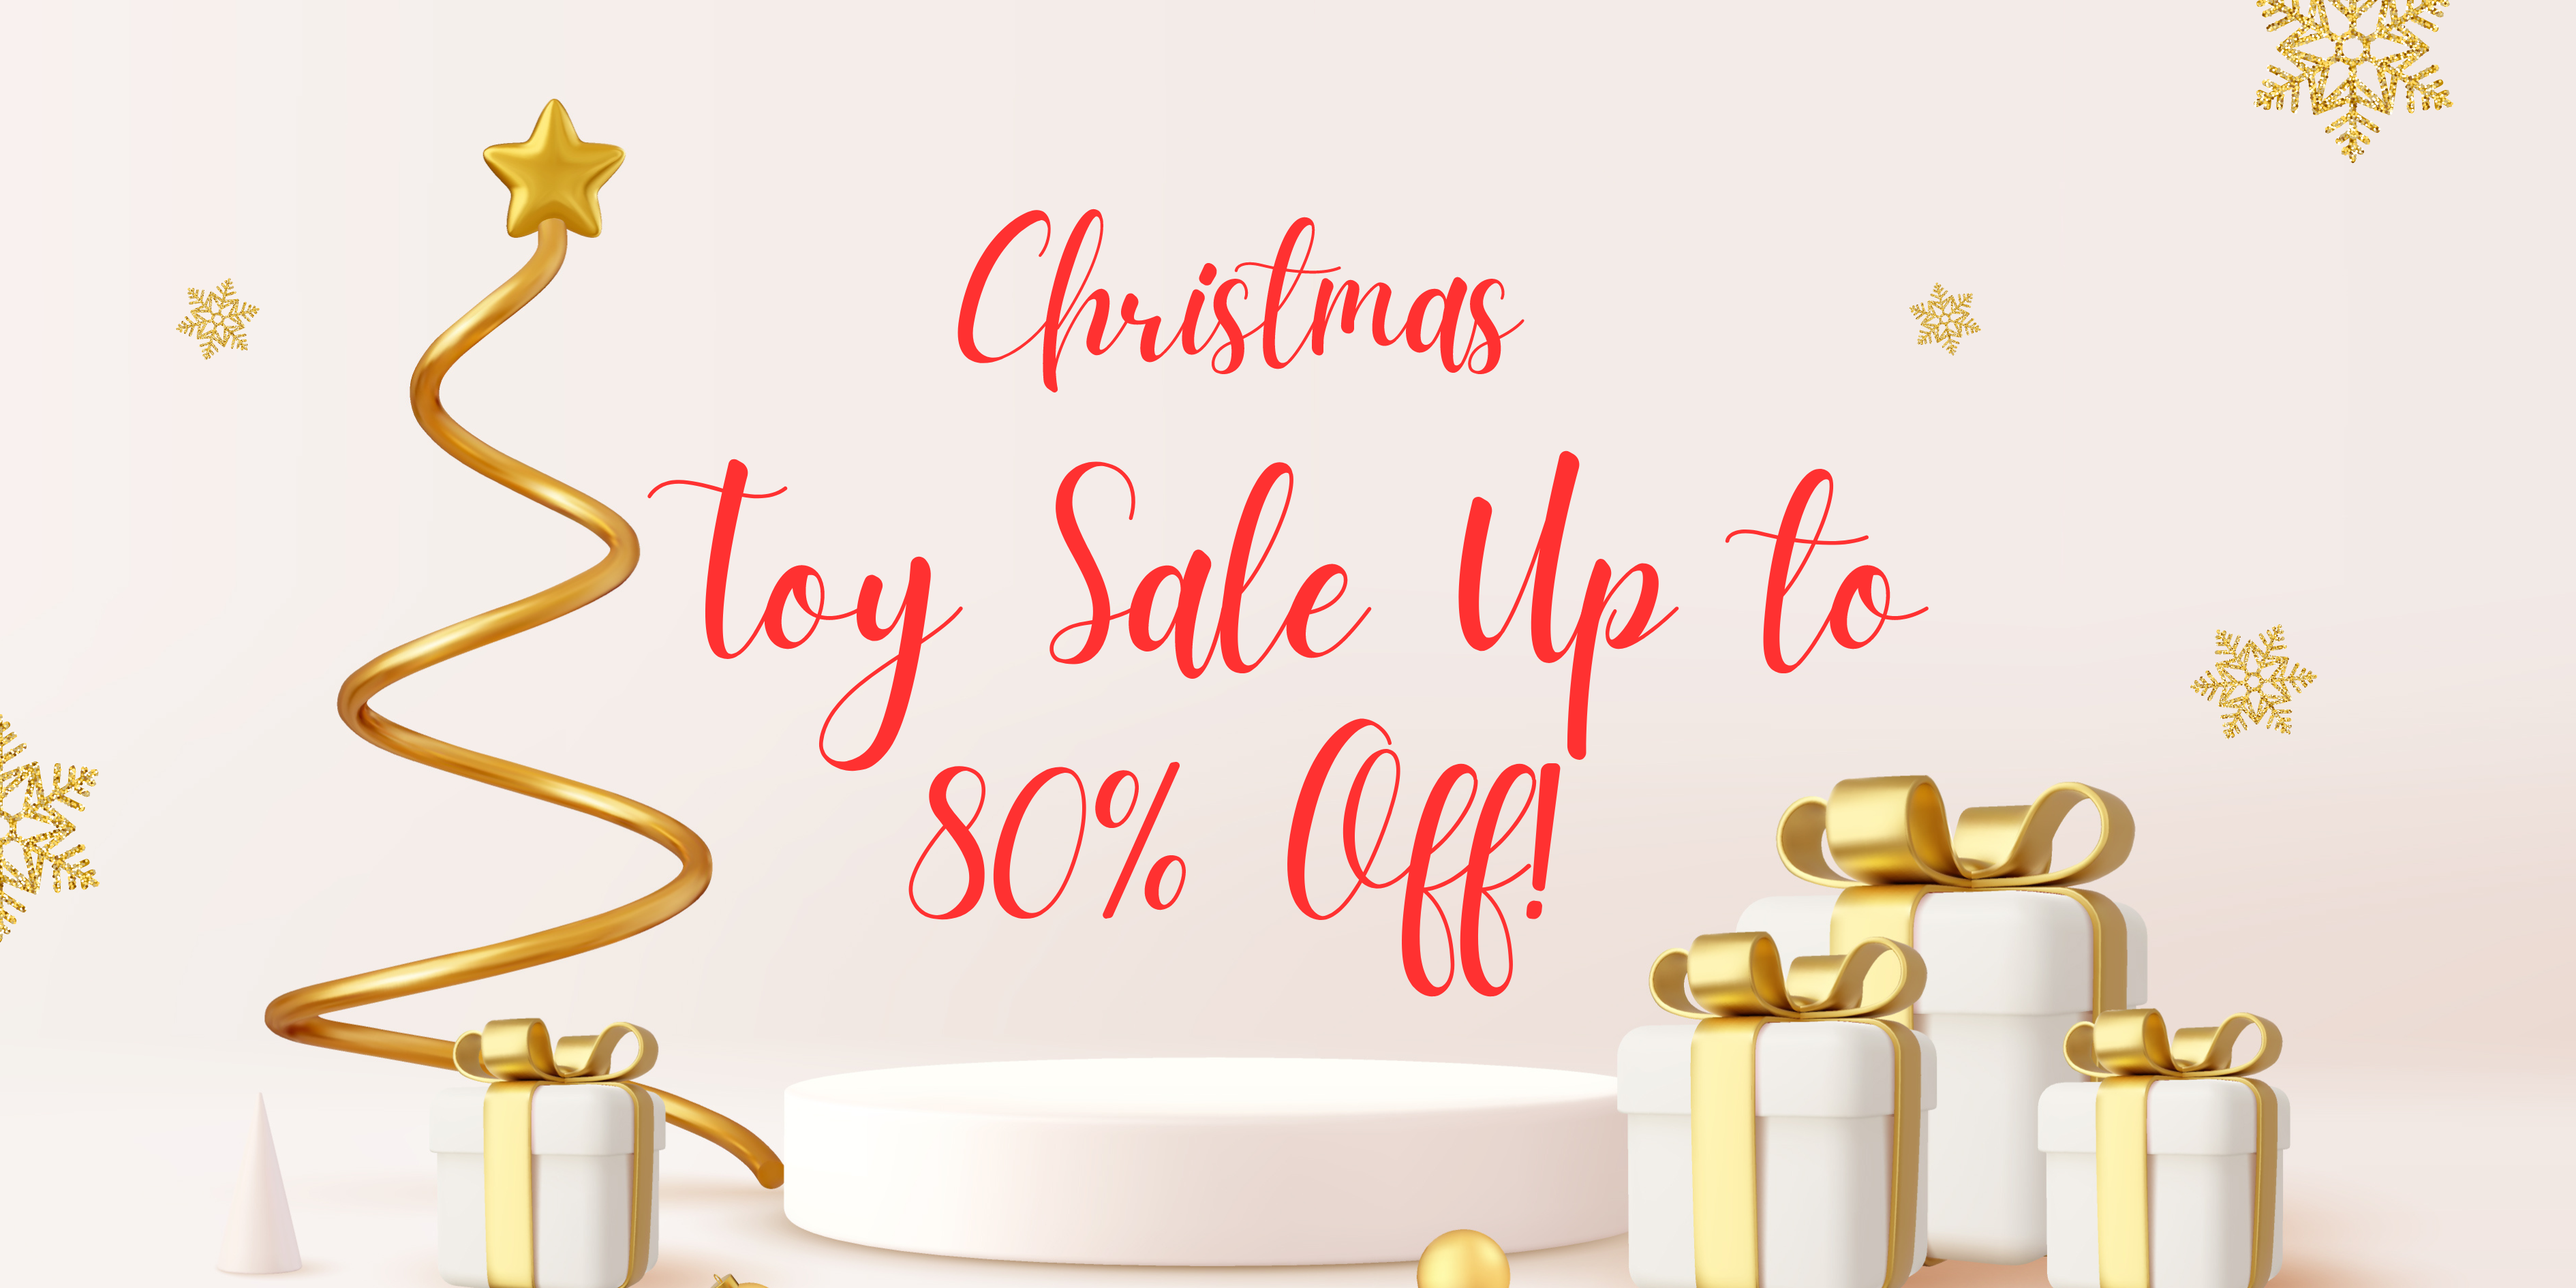 Up to 80% Off - Unbelievable Savings on Christmas Toy Sale!